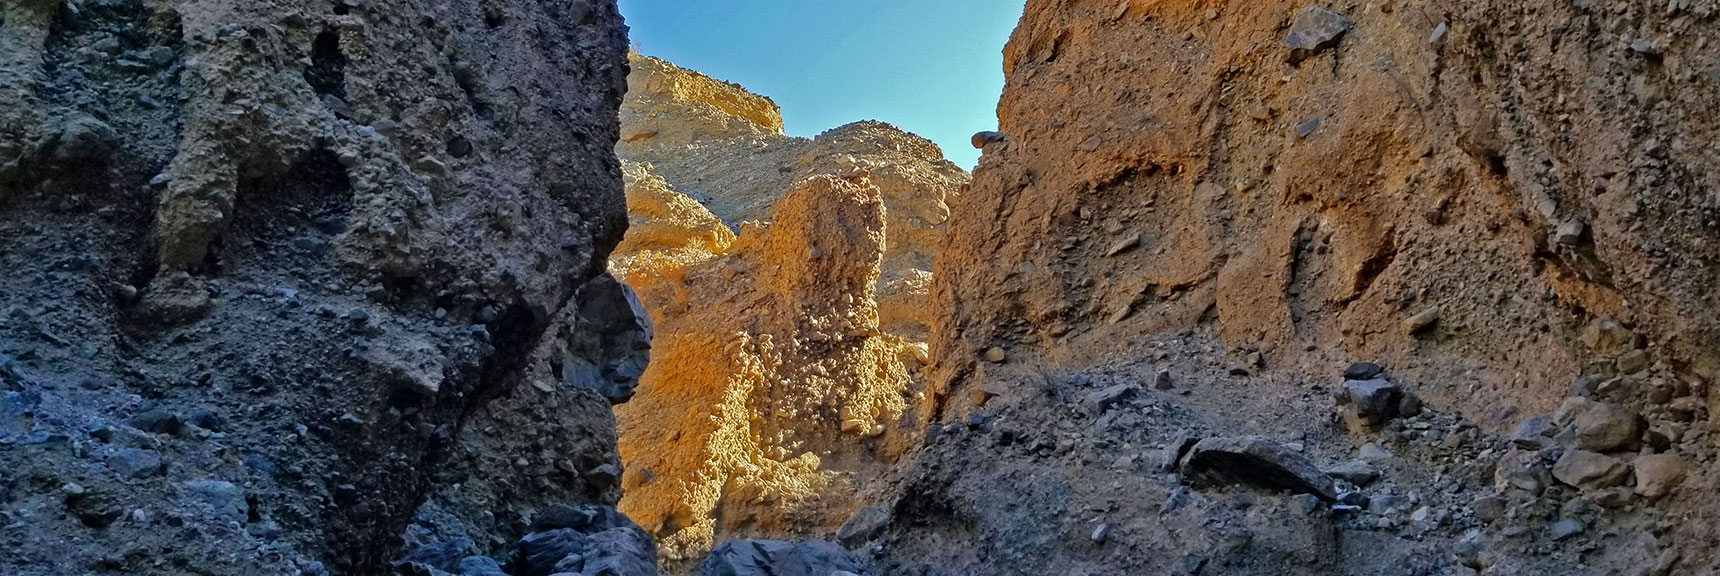 Open Area in the Third Slot | Sidewinder Canyon | Death Valley National Park, California